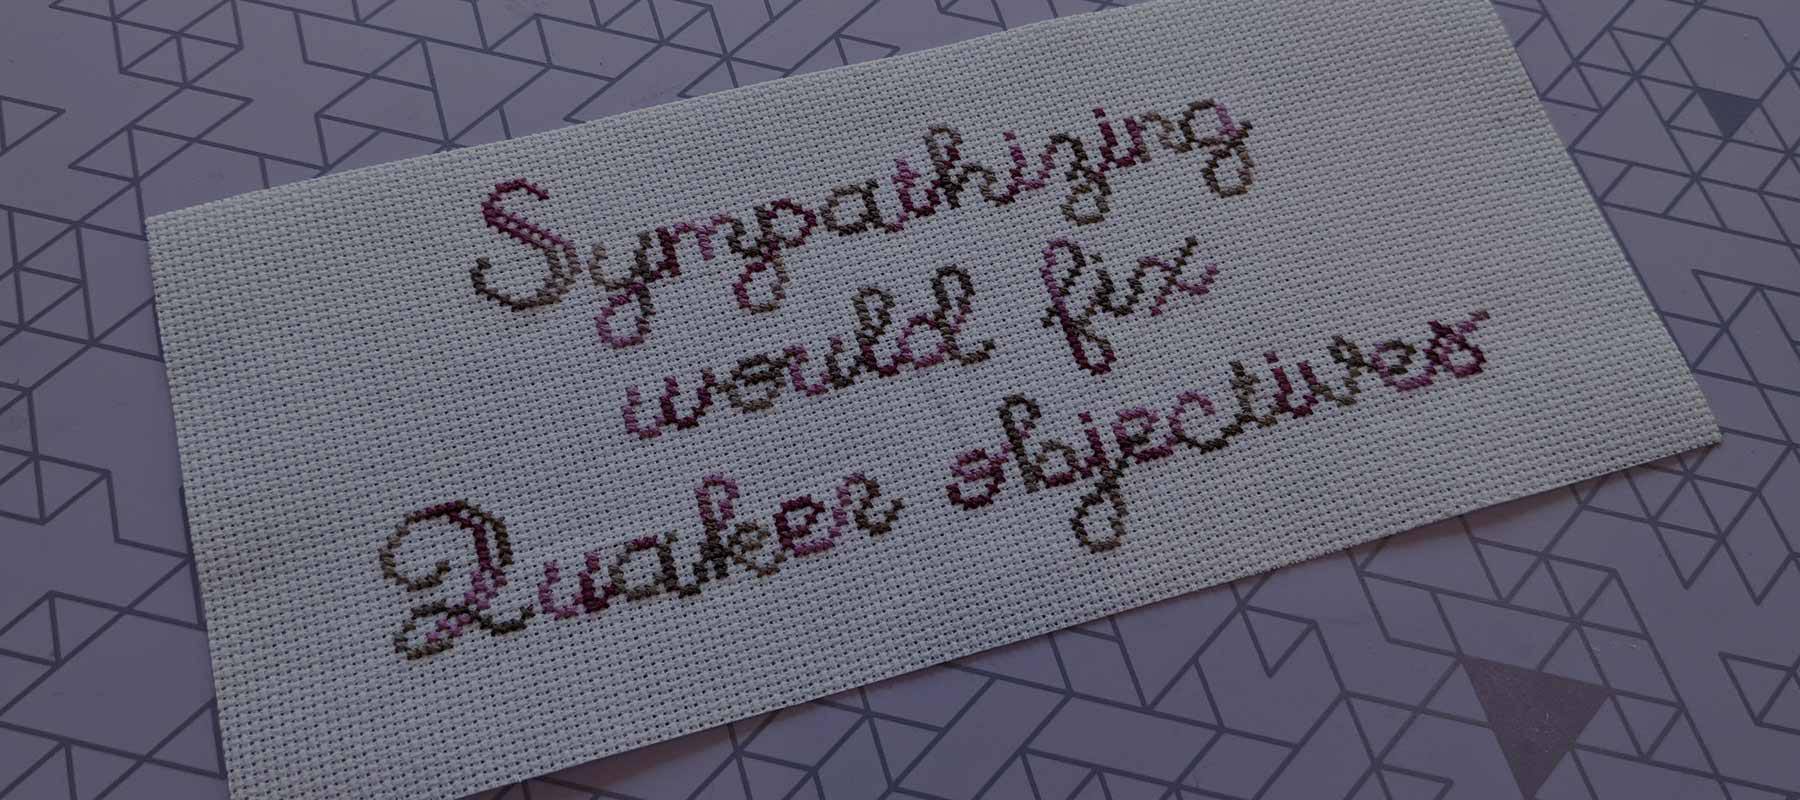 My latest cross-stitch font 'Juliet' is now available!